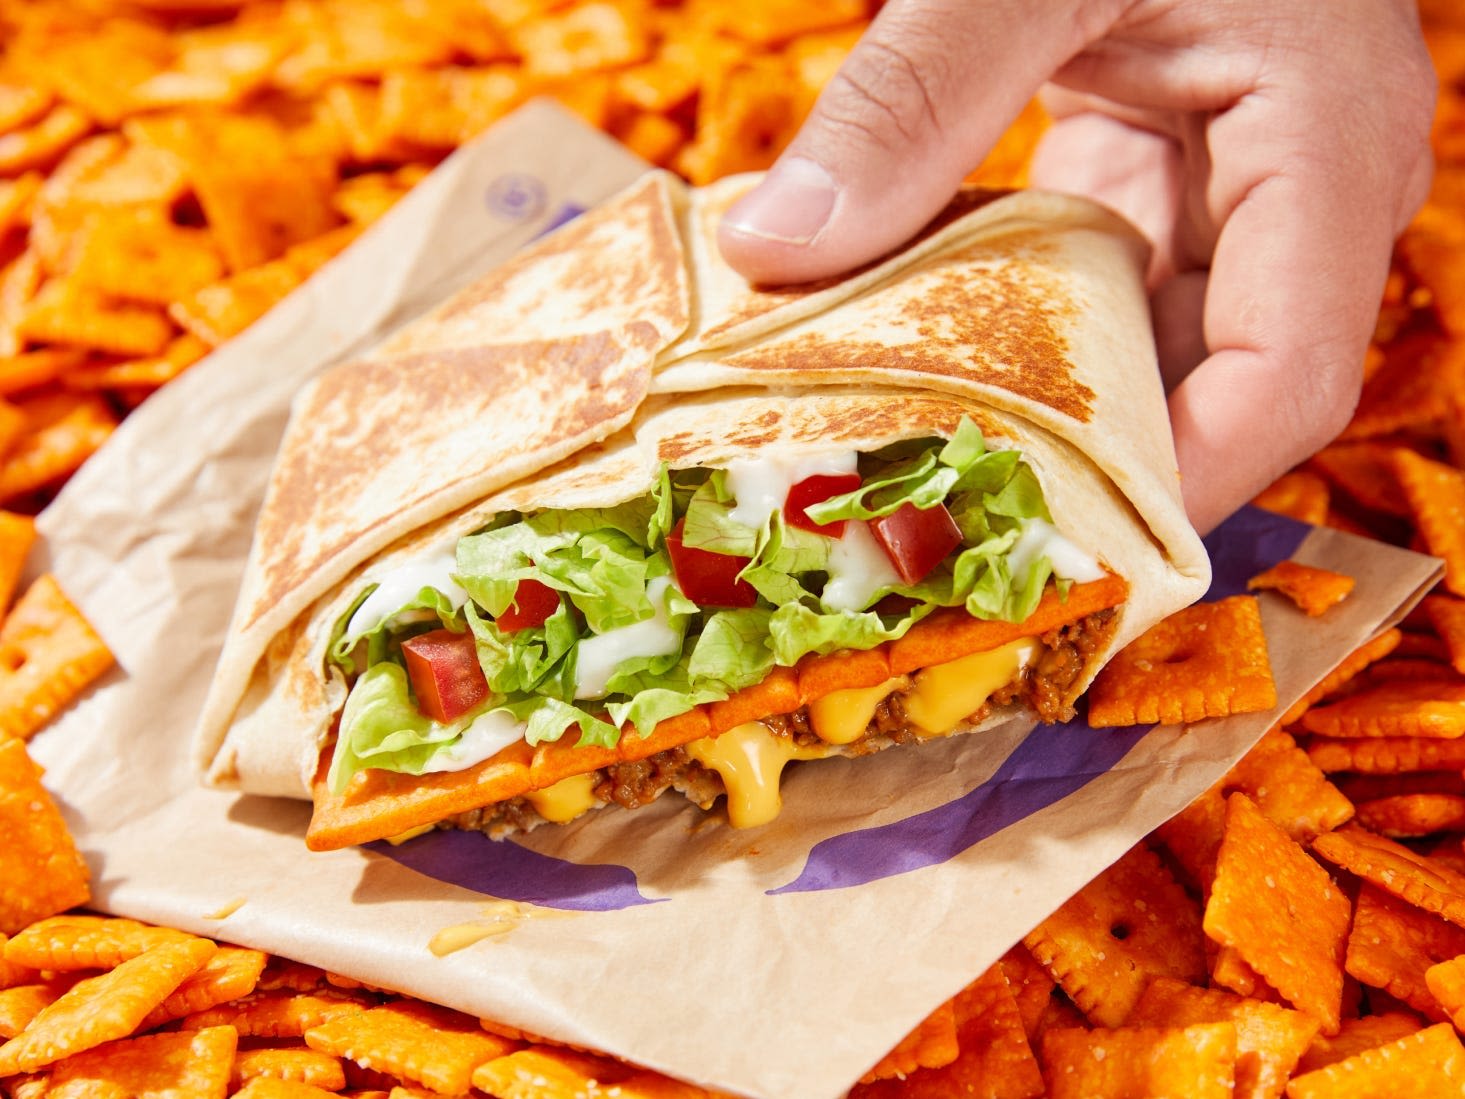 Taco Bell spent 4 years creating the new Big Cheez-It Crunchwrap Supreme — and it was worth the wait